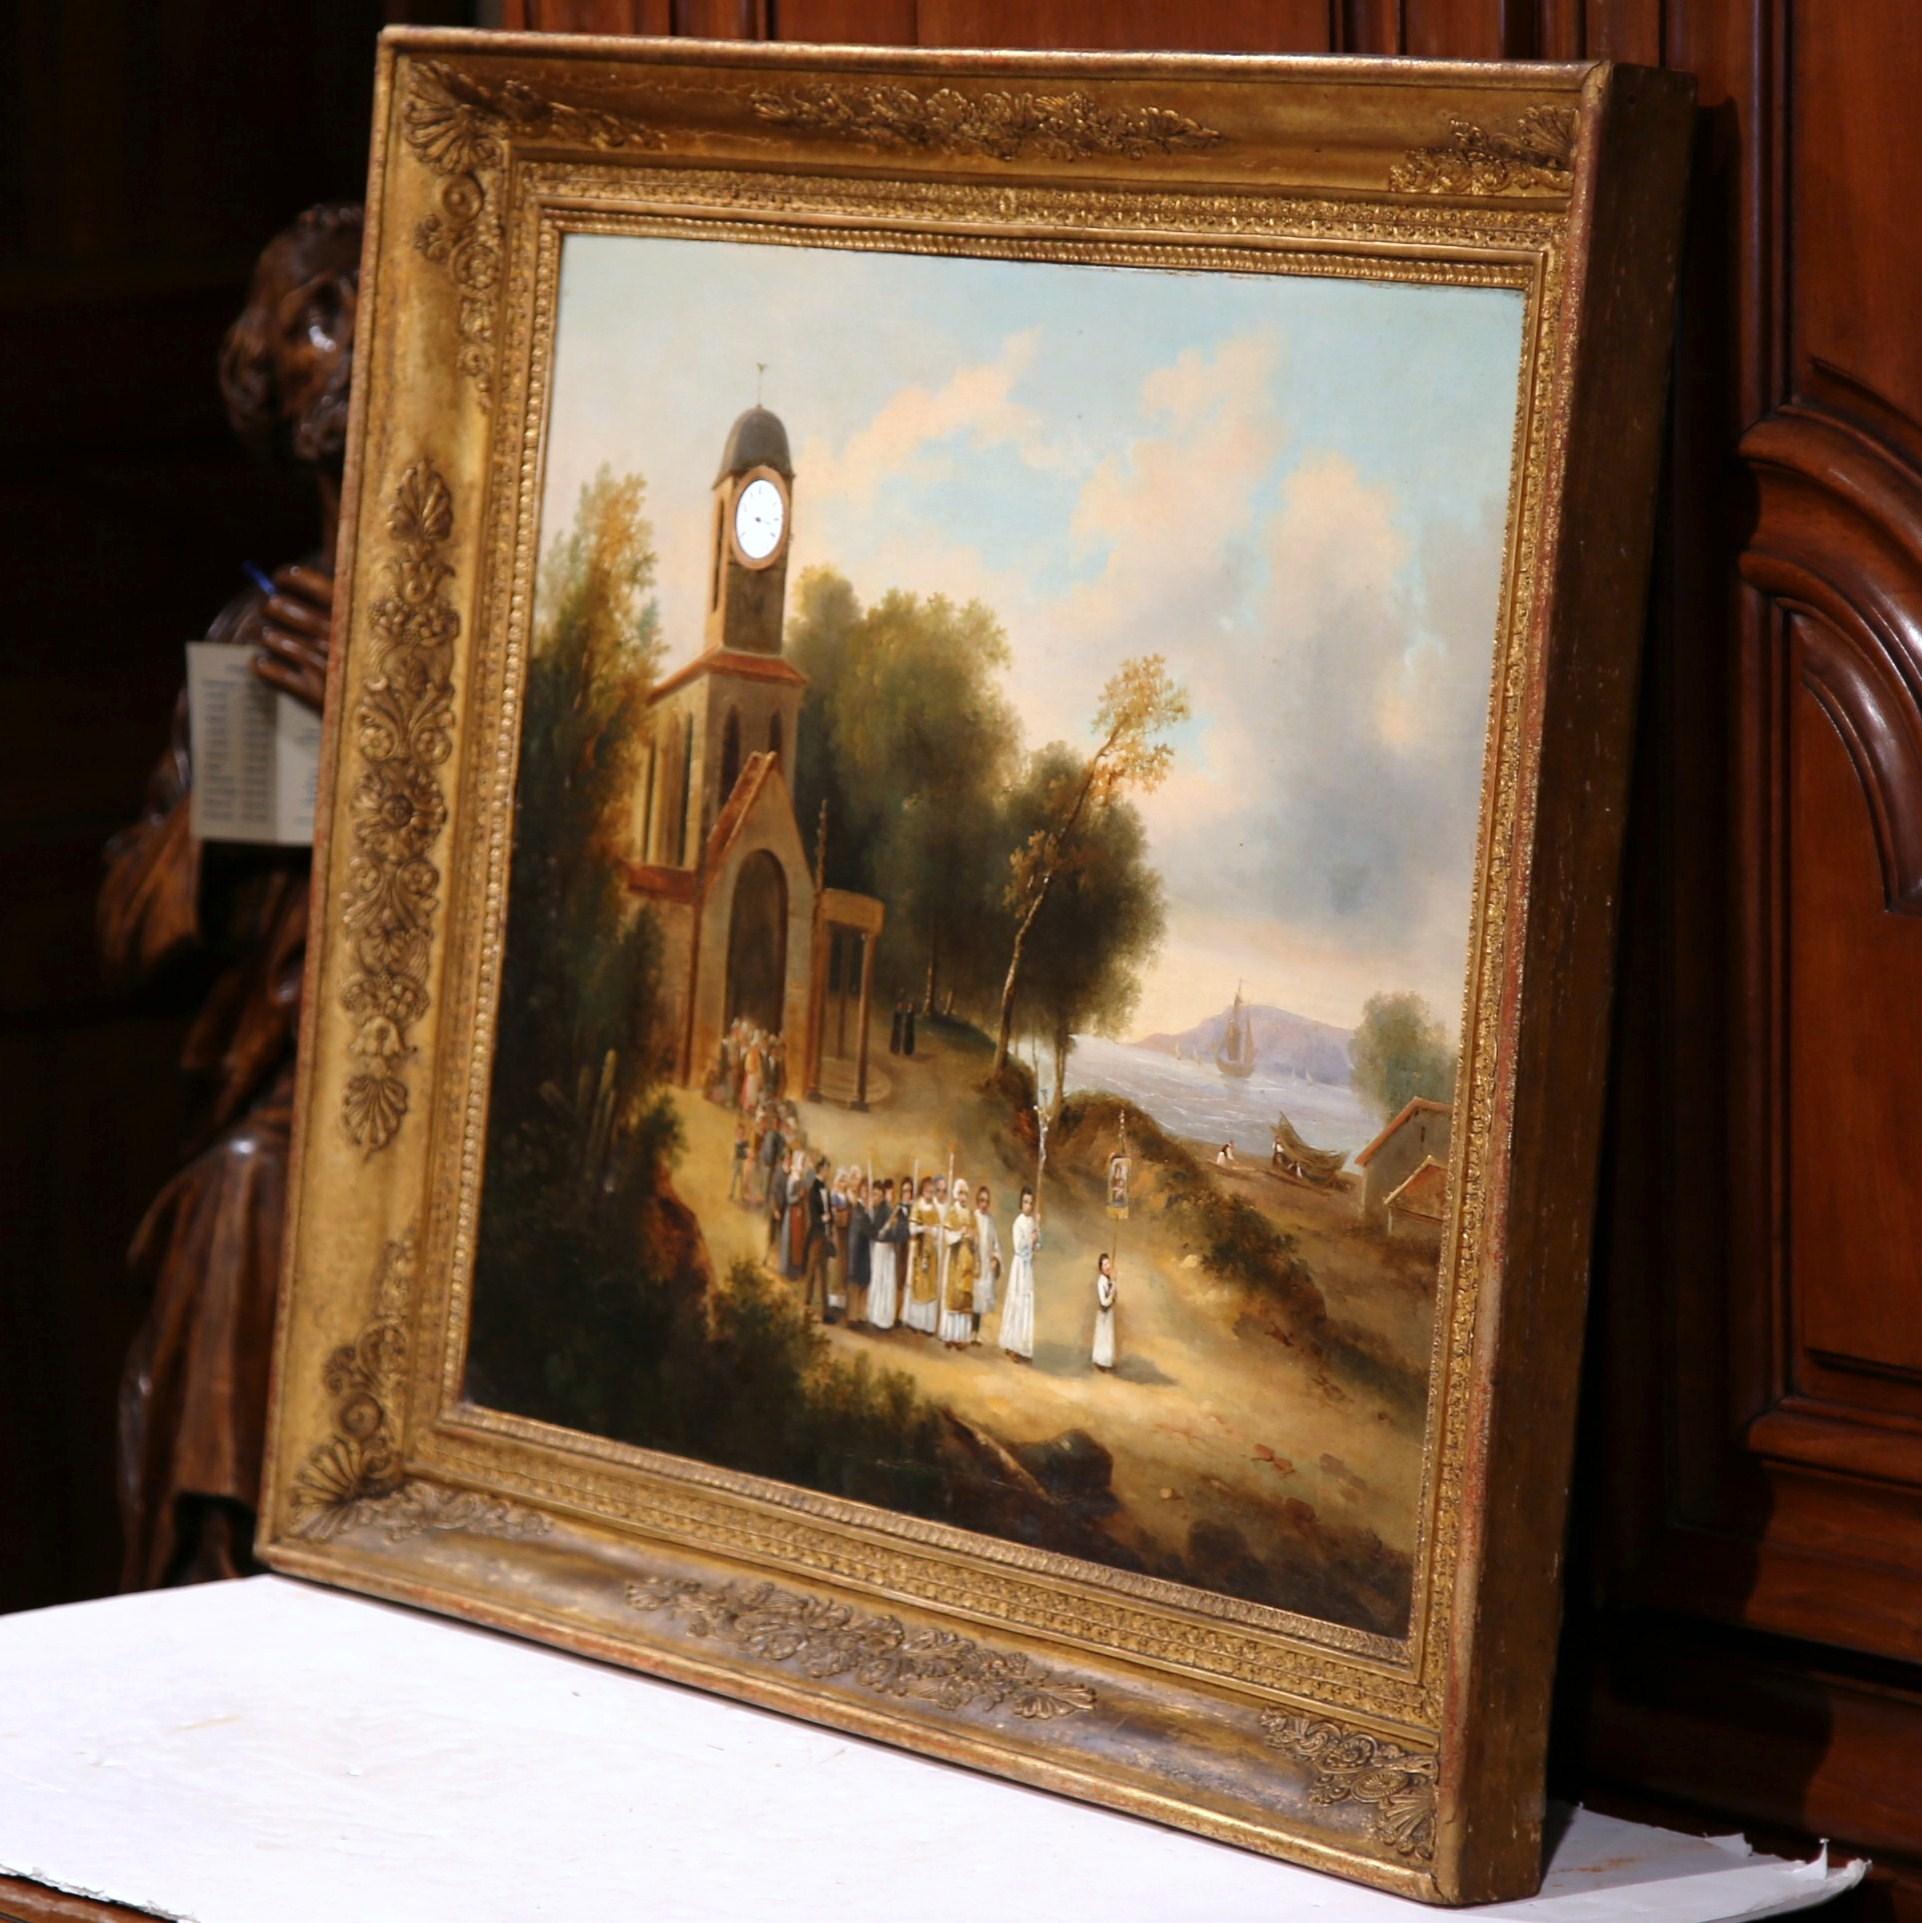 Canvas Mid-19th Century French Church Oil Painting 'La Procession' in Carved Gilt Frame